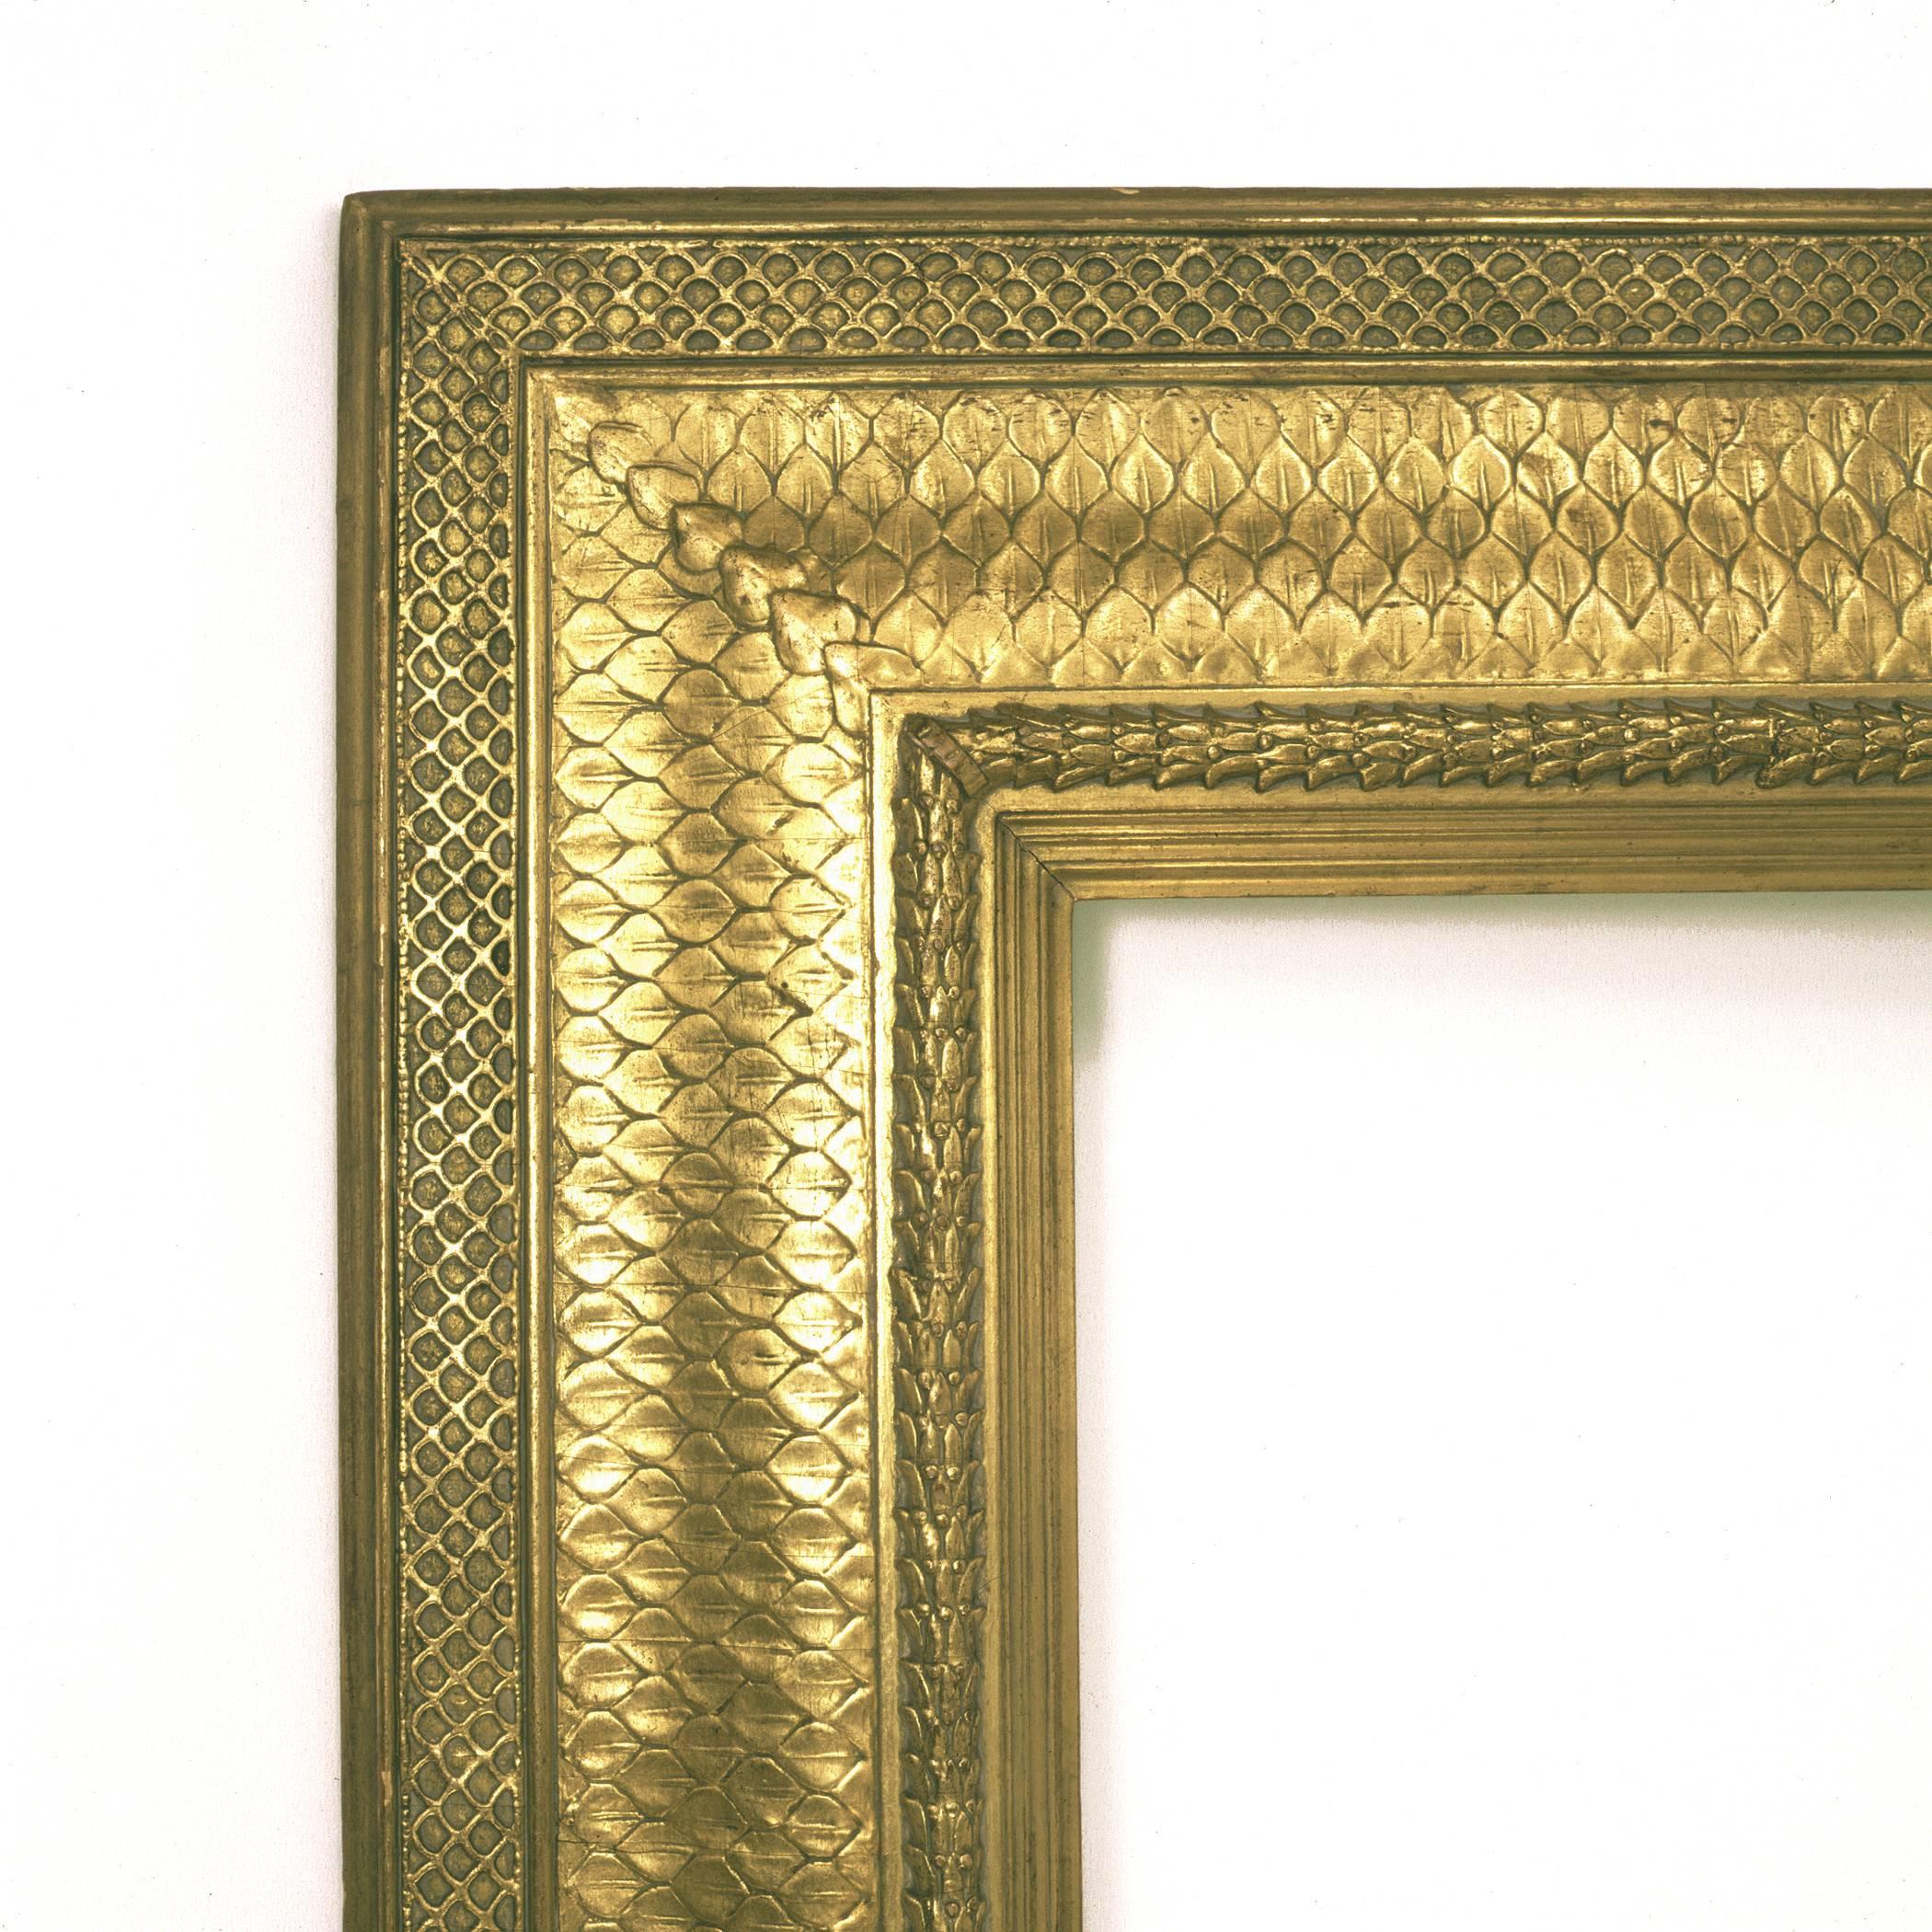 Original period frames designed by the pre-eminent American architect Stanford white are extremely rare and large ones of aesthetic design with original gilding are rarer yet. With its cast openwork outer diaper border and its symmetrically arranged